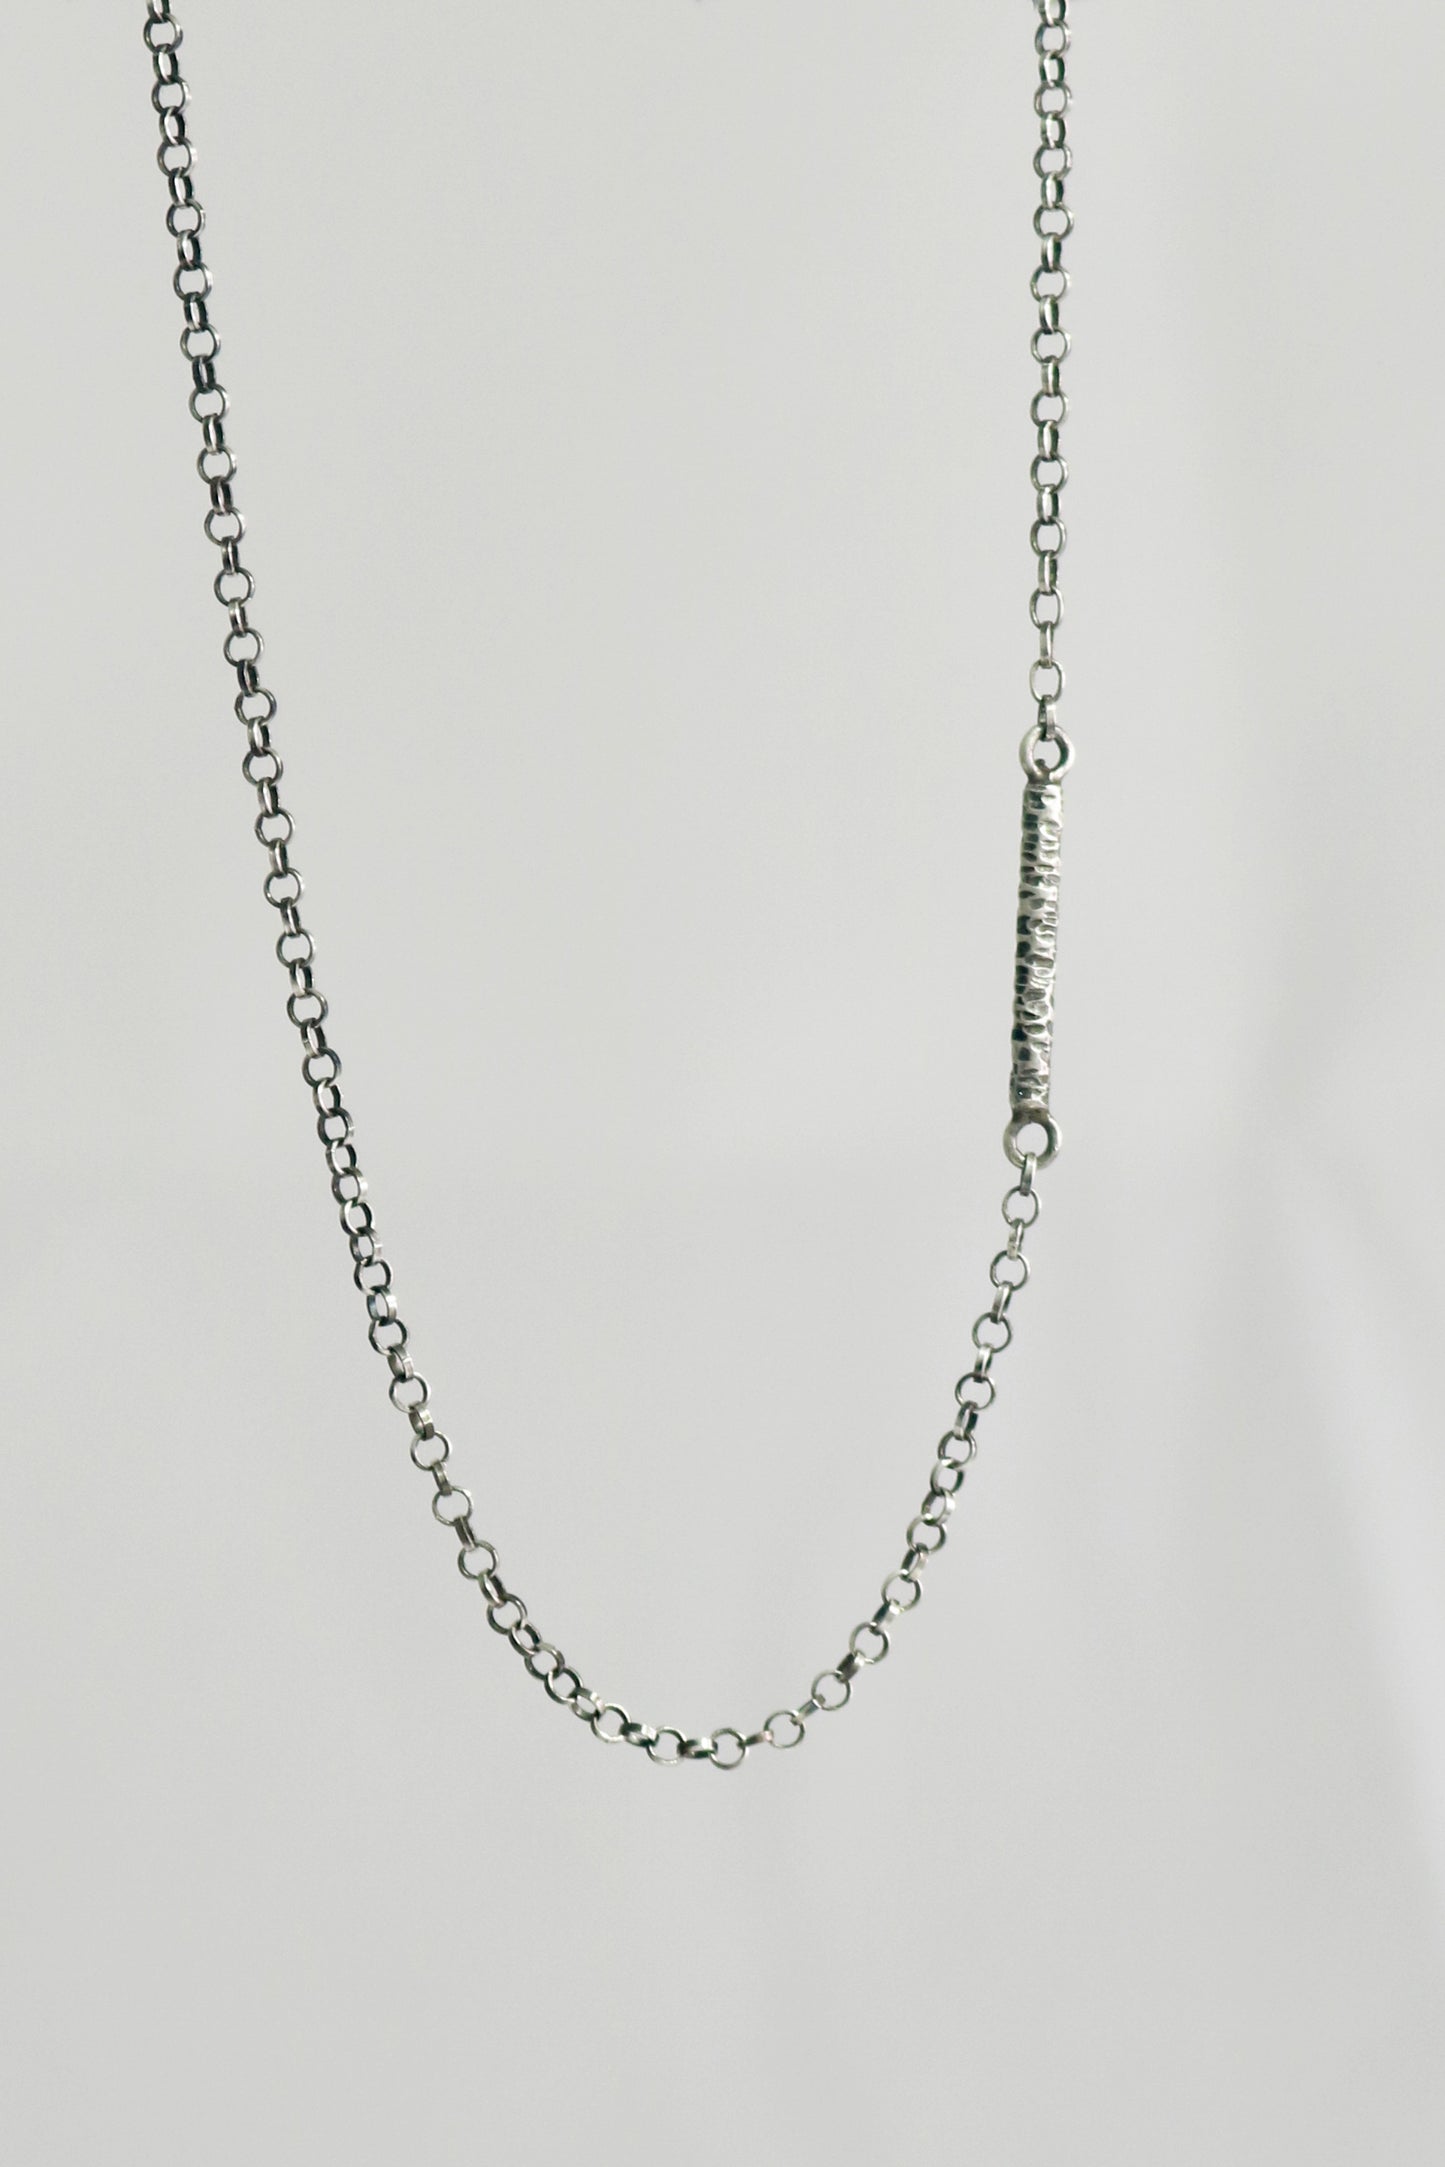 Solid sterling silver chain with a textured 15mm silver bar. 